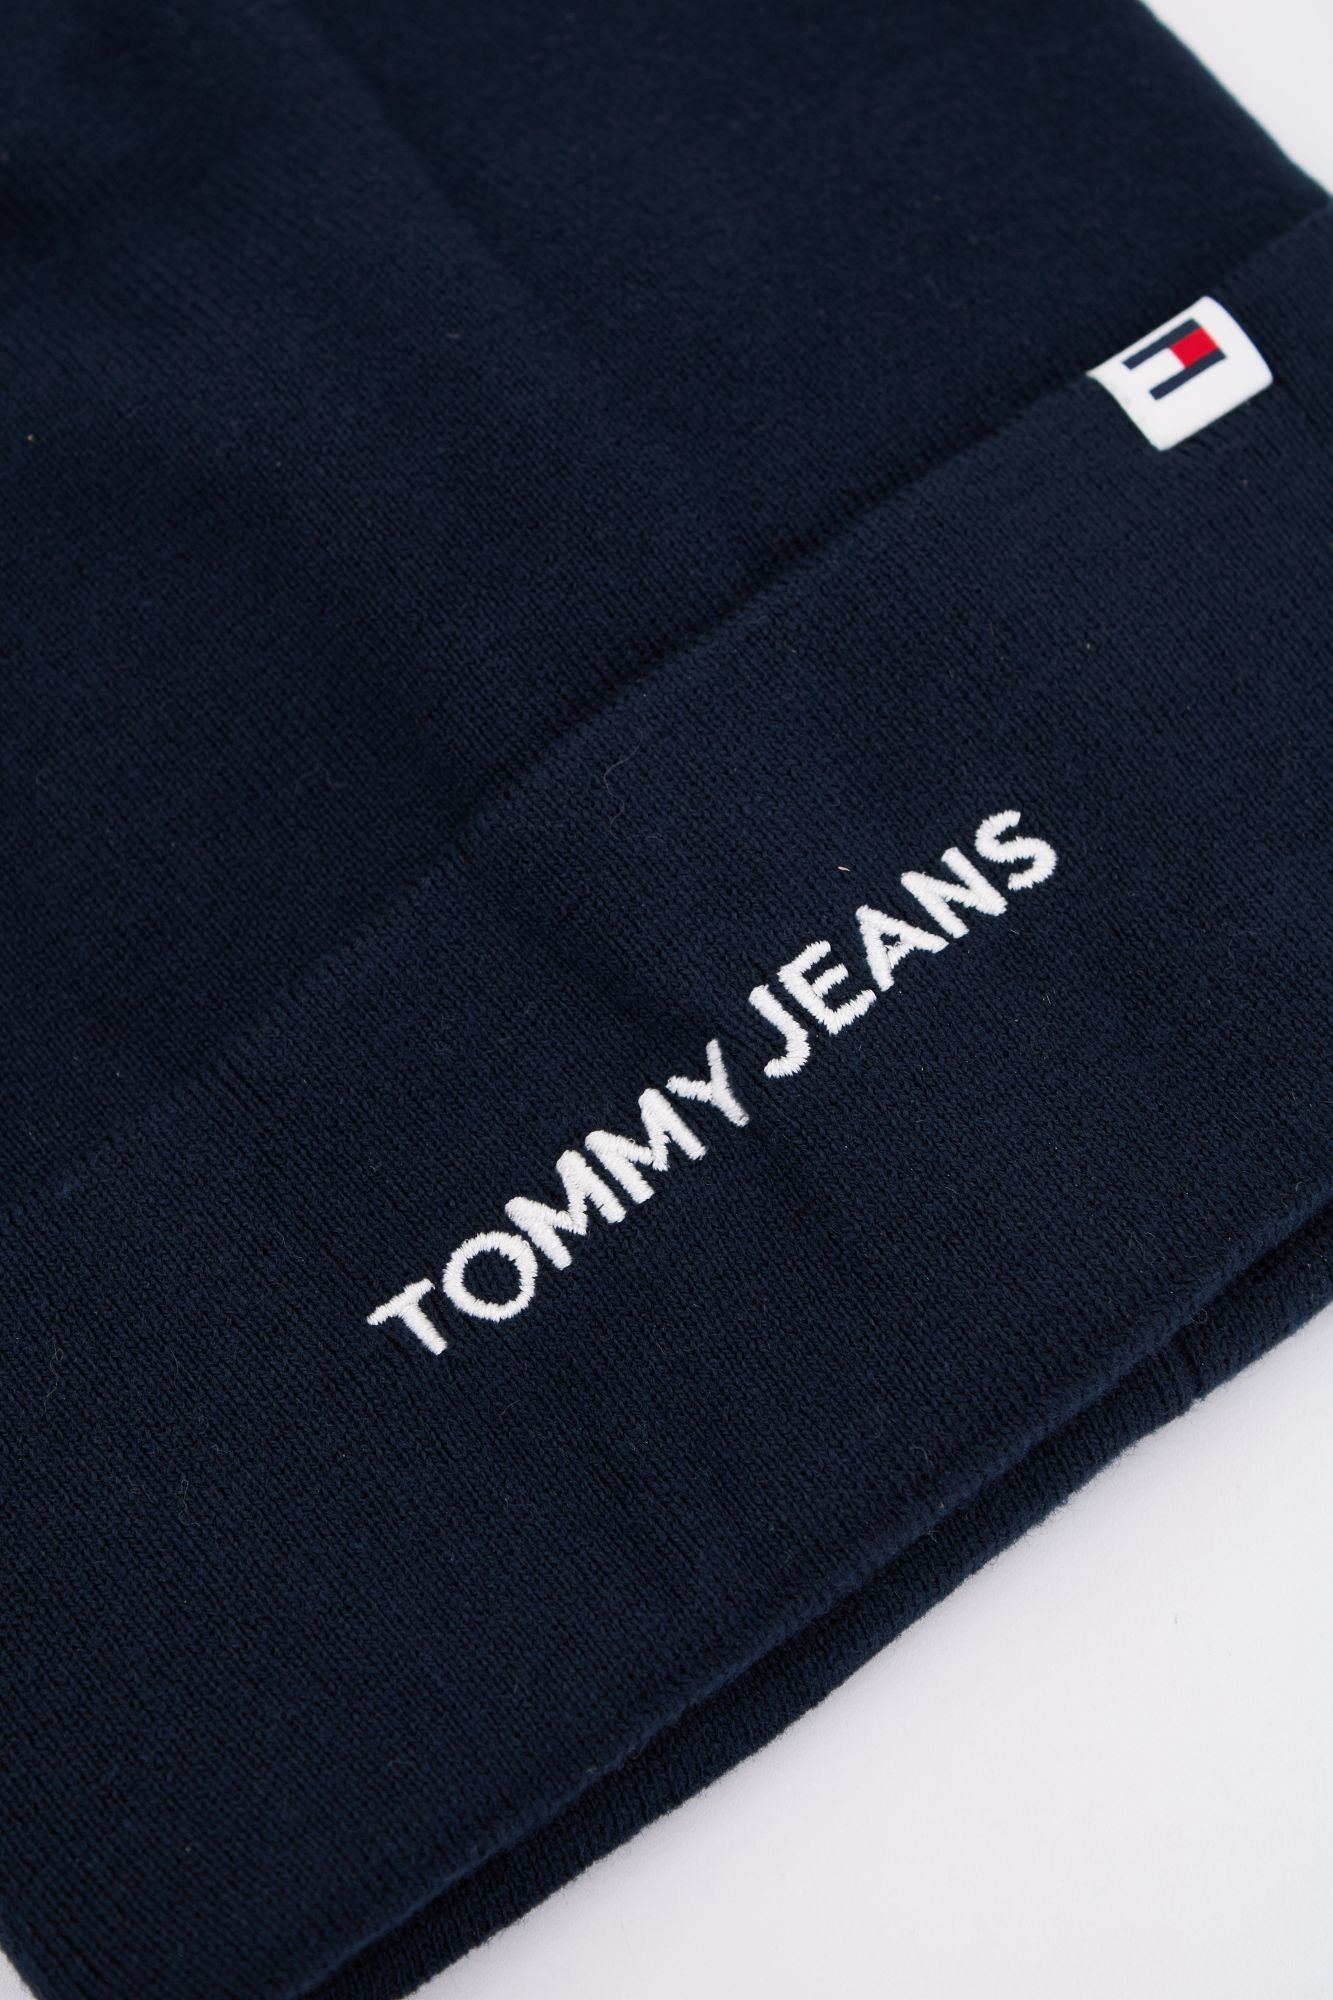 jeans en Gorros YellowShop Tommy de Yellowshop online – Mujer